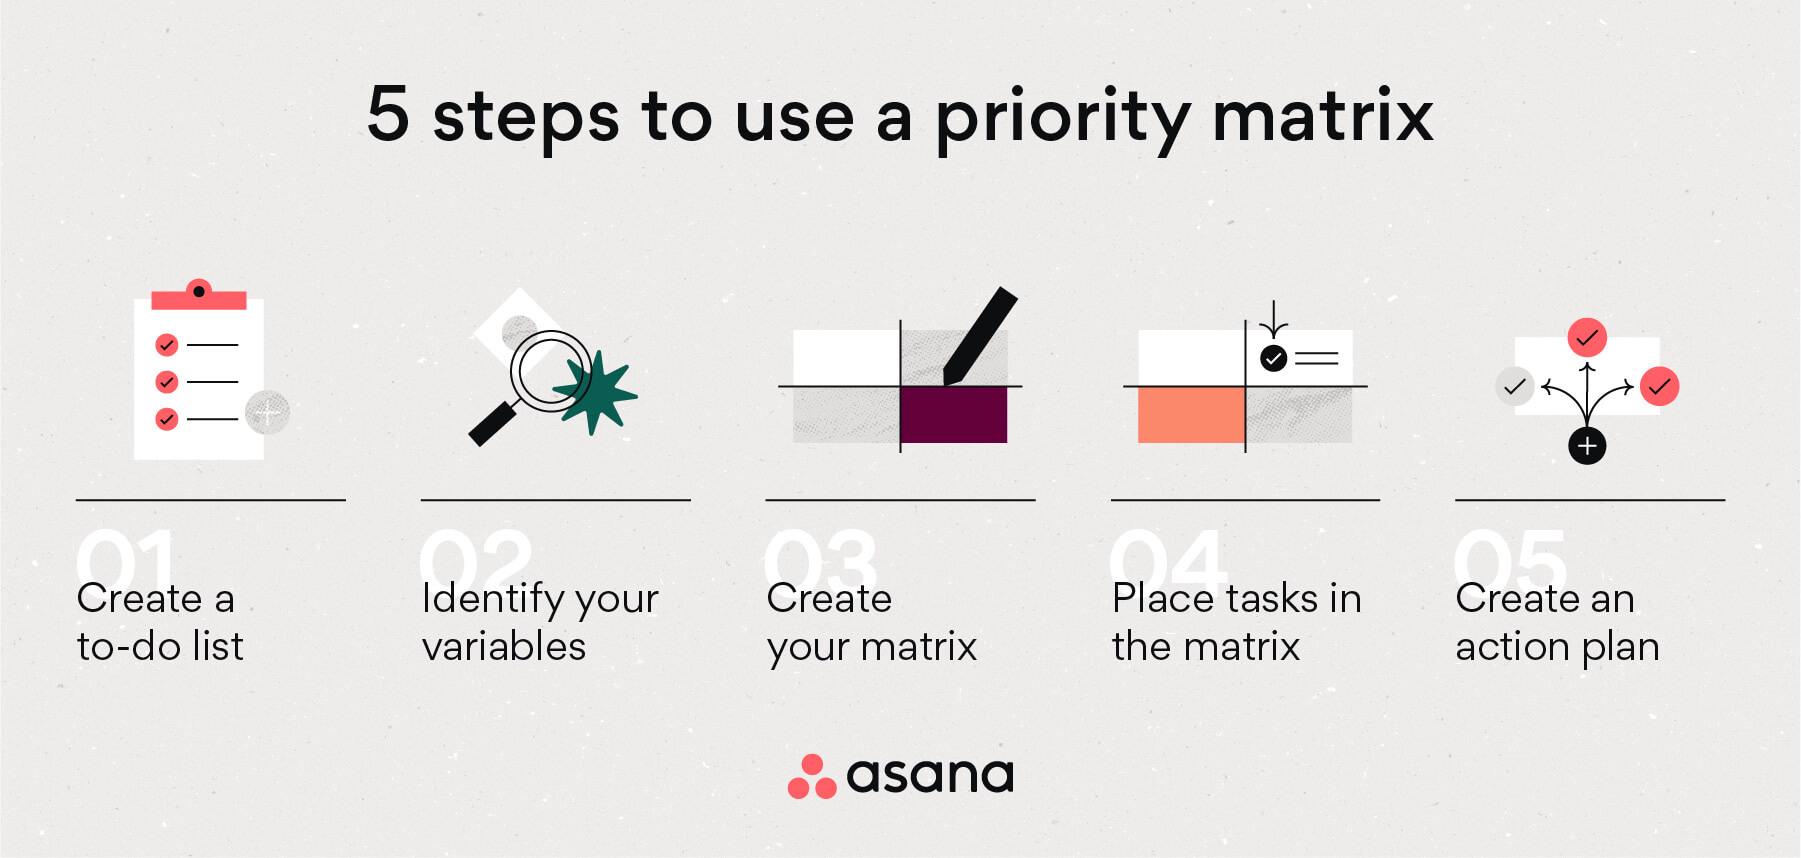 5 steps to use a priority matrix